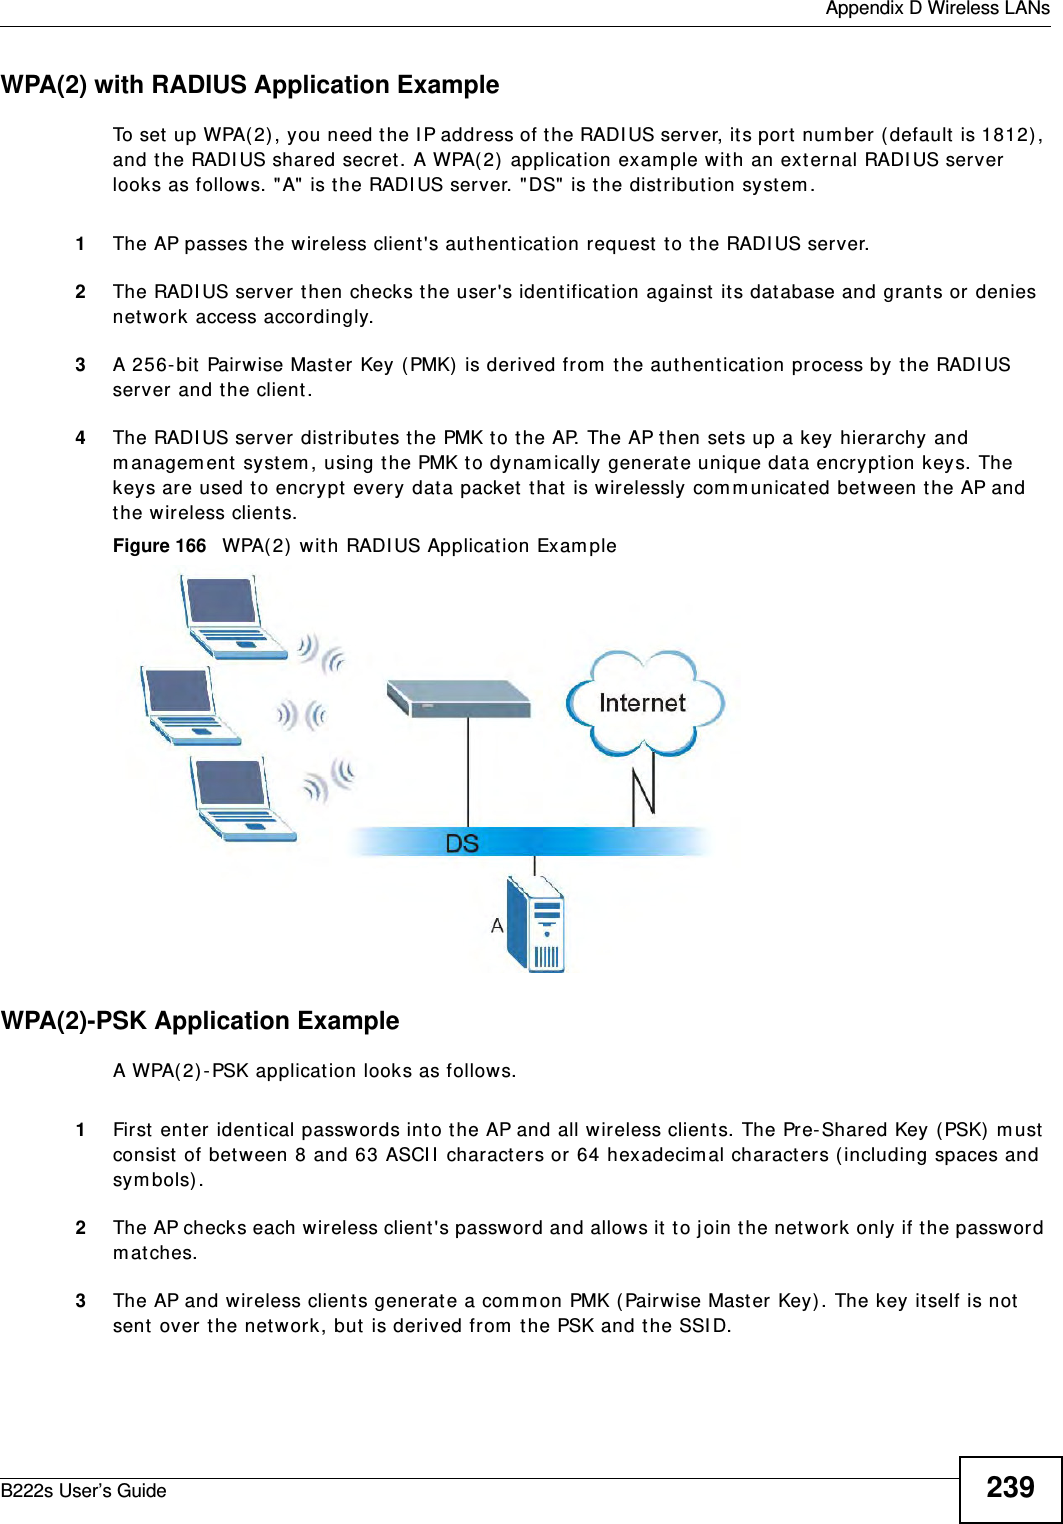  Appendix D Wireless LANsB222s User’s Guide 239WPA(2) with RADIUS Application ExampleTo set  up WPA(2) , you need the I P address of the RADI US server, it s port  num ber ( default  is 1812) , and t he RADI US shared secret . A WPA( 2)  application exam ple wit h an ext er nal RADI US server looks as follows. &quot; A&quot; is t he RADI US server. &quot;DS&quot;  is t he distribut ion system .1The AP passes t he wireless client &apos;s aut hent icat ion request  t o t he RADI US server.2The RADI US ser ver t hen checks t he user&apos;s ident ification against its dat abase and grants or  denies network access accordingly.3A 256- bit  Pairwise Mast er Key ( PMK)  is der ived from  the authent icat ion process by t he RADI US server and t he client .4The RADI US server dist ribut es the PMK t o t he AP. The AP t hen set s up a key hierarchy and m anagem ent  syst em , using t he PMK t o dynam ically generat e unique data encrypt ion keys. The keys are used t o encrypt every dat a packet that is wirelessly com municated bet ween t he AP and the wireless client s.Figure 166   WPA( 2)  wit h RADI US Applicat ion Exam pleWPA(2)-PSK Application ExampleA WPA(2) -PSK application looks as follows.1First  ent er identical passw ords int o t he AP and all wireless client s. The Pre- Shared Key (PSK)  m ust  consist of bet ween 8 and 63 ASCI I  charact ers or 64 hexadecim al characters ( including spaces and sy m bols) .2The AP checks each w ireless client &apos;s passw ord and allows it  t o j oin the network only if t he password m at ches.3The AP and wireless client s generat e a com m on PMK ( Pairwise Mast er Key) . The key it self is not sent  over t he net work, but  is derived from  t he PSK and t he SSI D. 